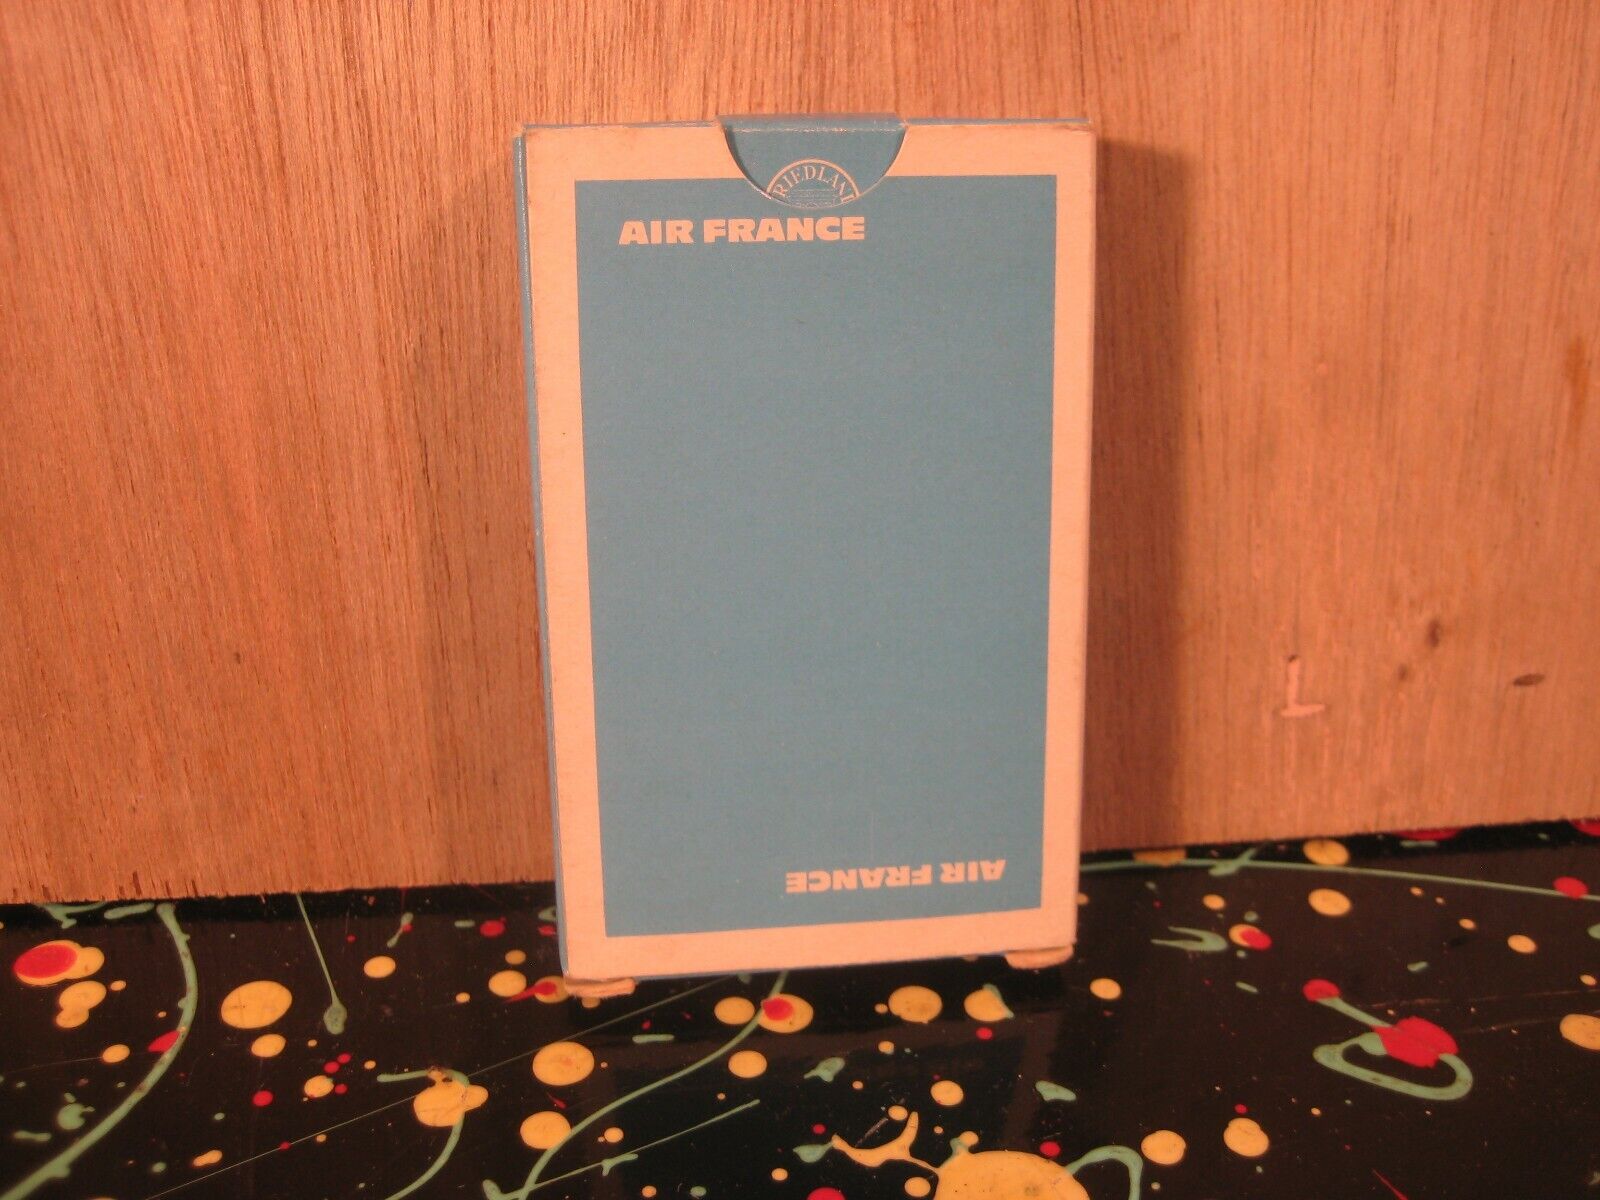 Air France French Airline Promo Playing Card Set by Friedland